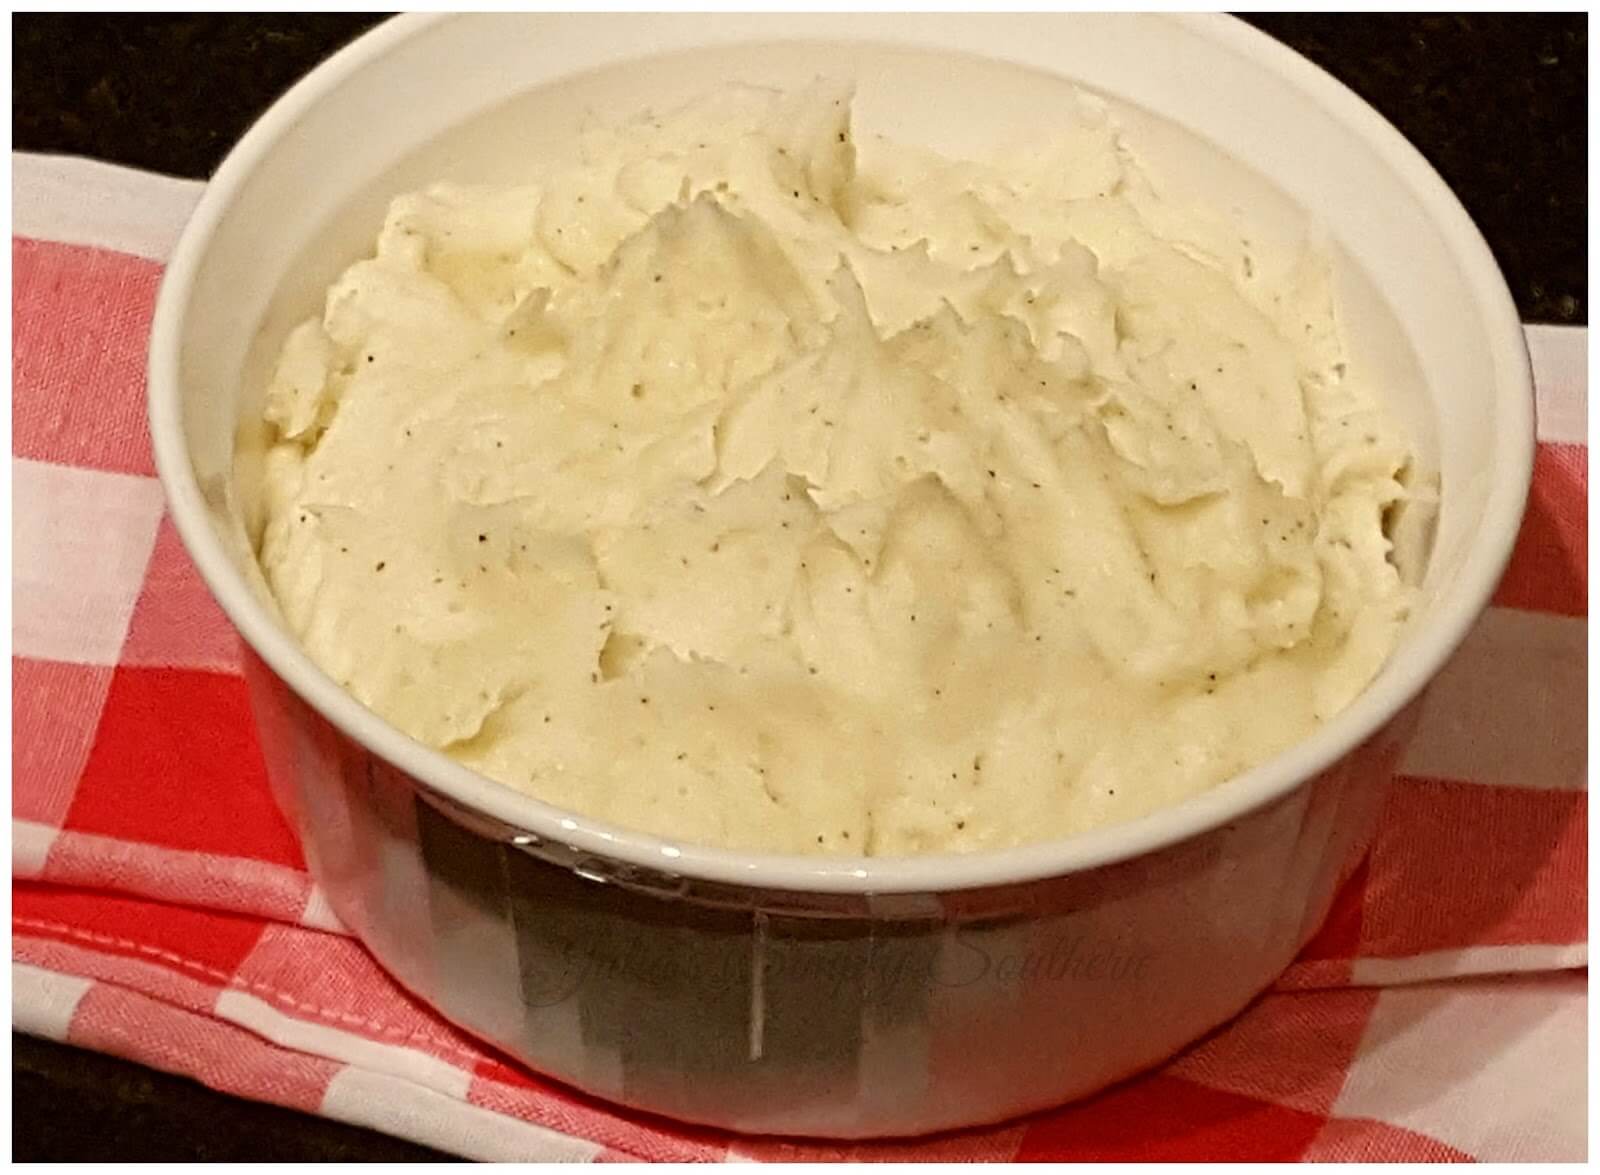 Best Southern Mashed Potatoes with Duke's Mayonnaise in a white bowl with gingham cloth